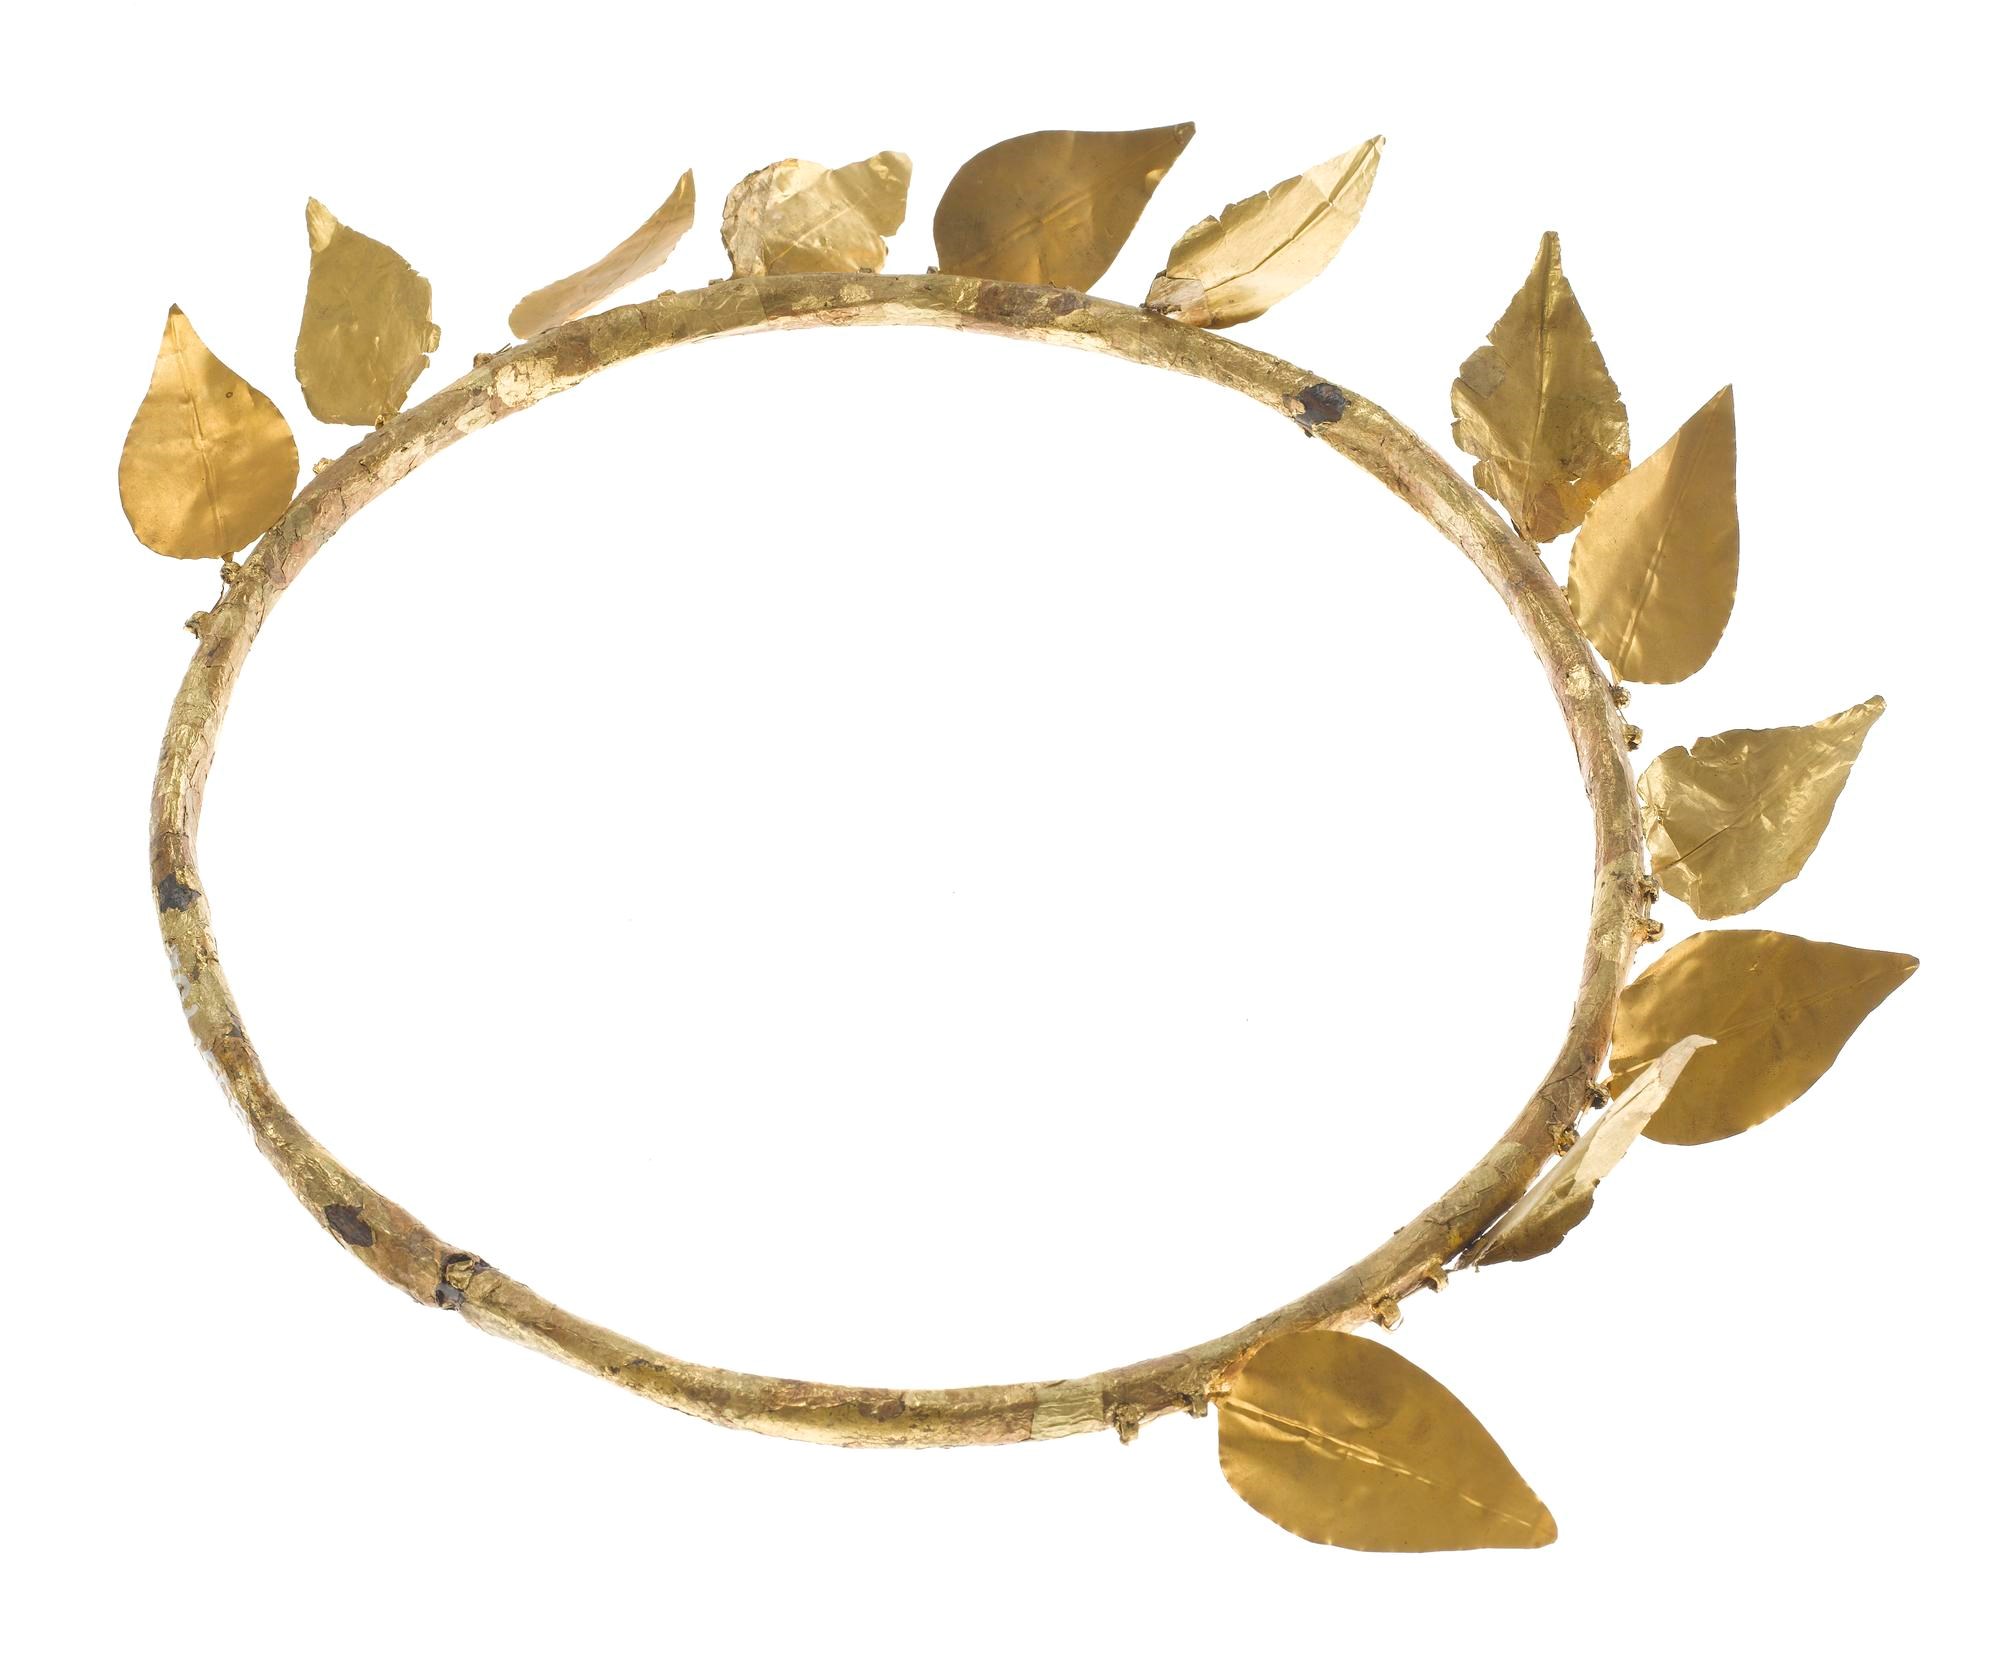 Wreath of twelve gold-foil leaves attached to a ring of copper, found on the mummy of Montsuef: Ancient Egyptian, excavated by A.H. Rhind in the tomb of Montsuef at Sheikh Abd el-Qurna, Thebes, Early Roman Period, c9 BC.